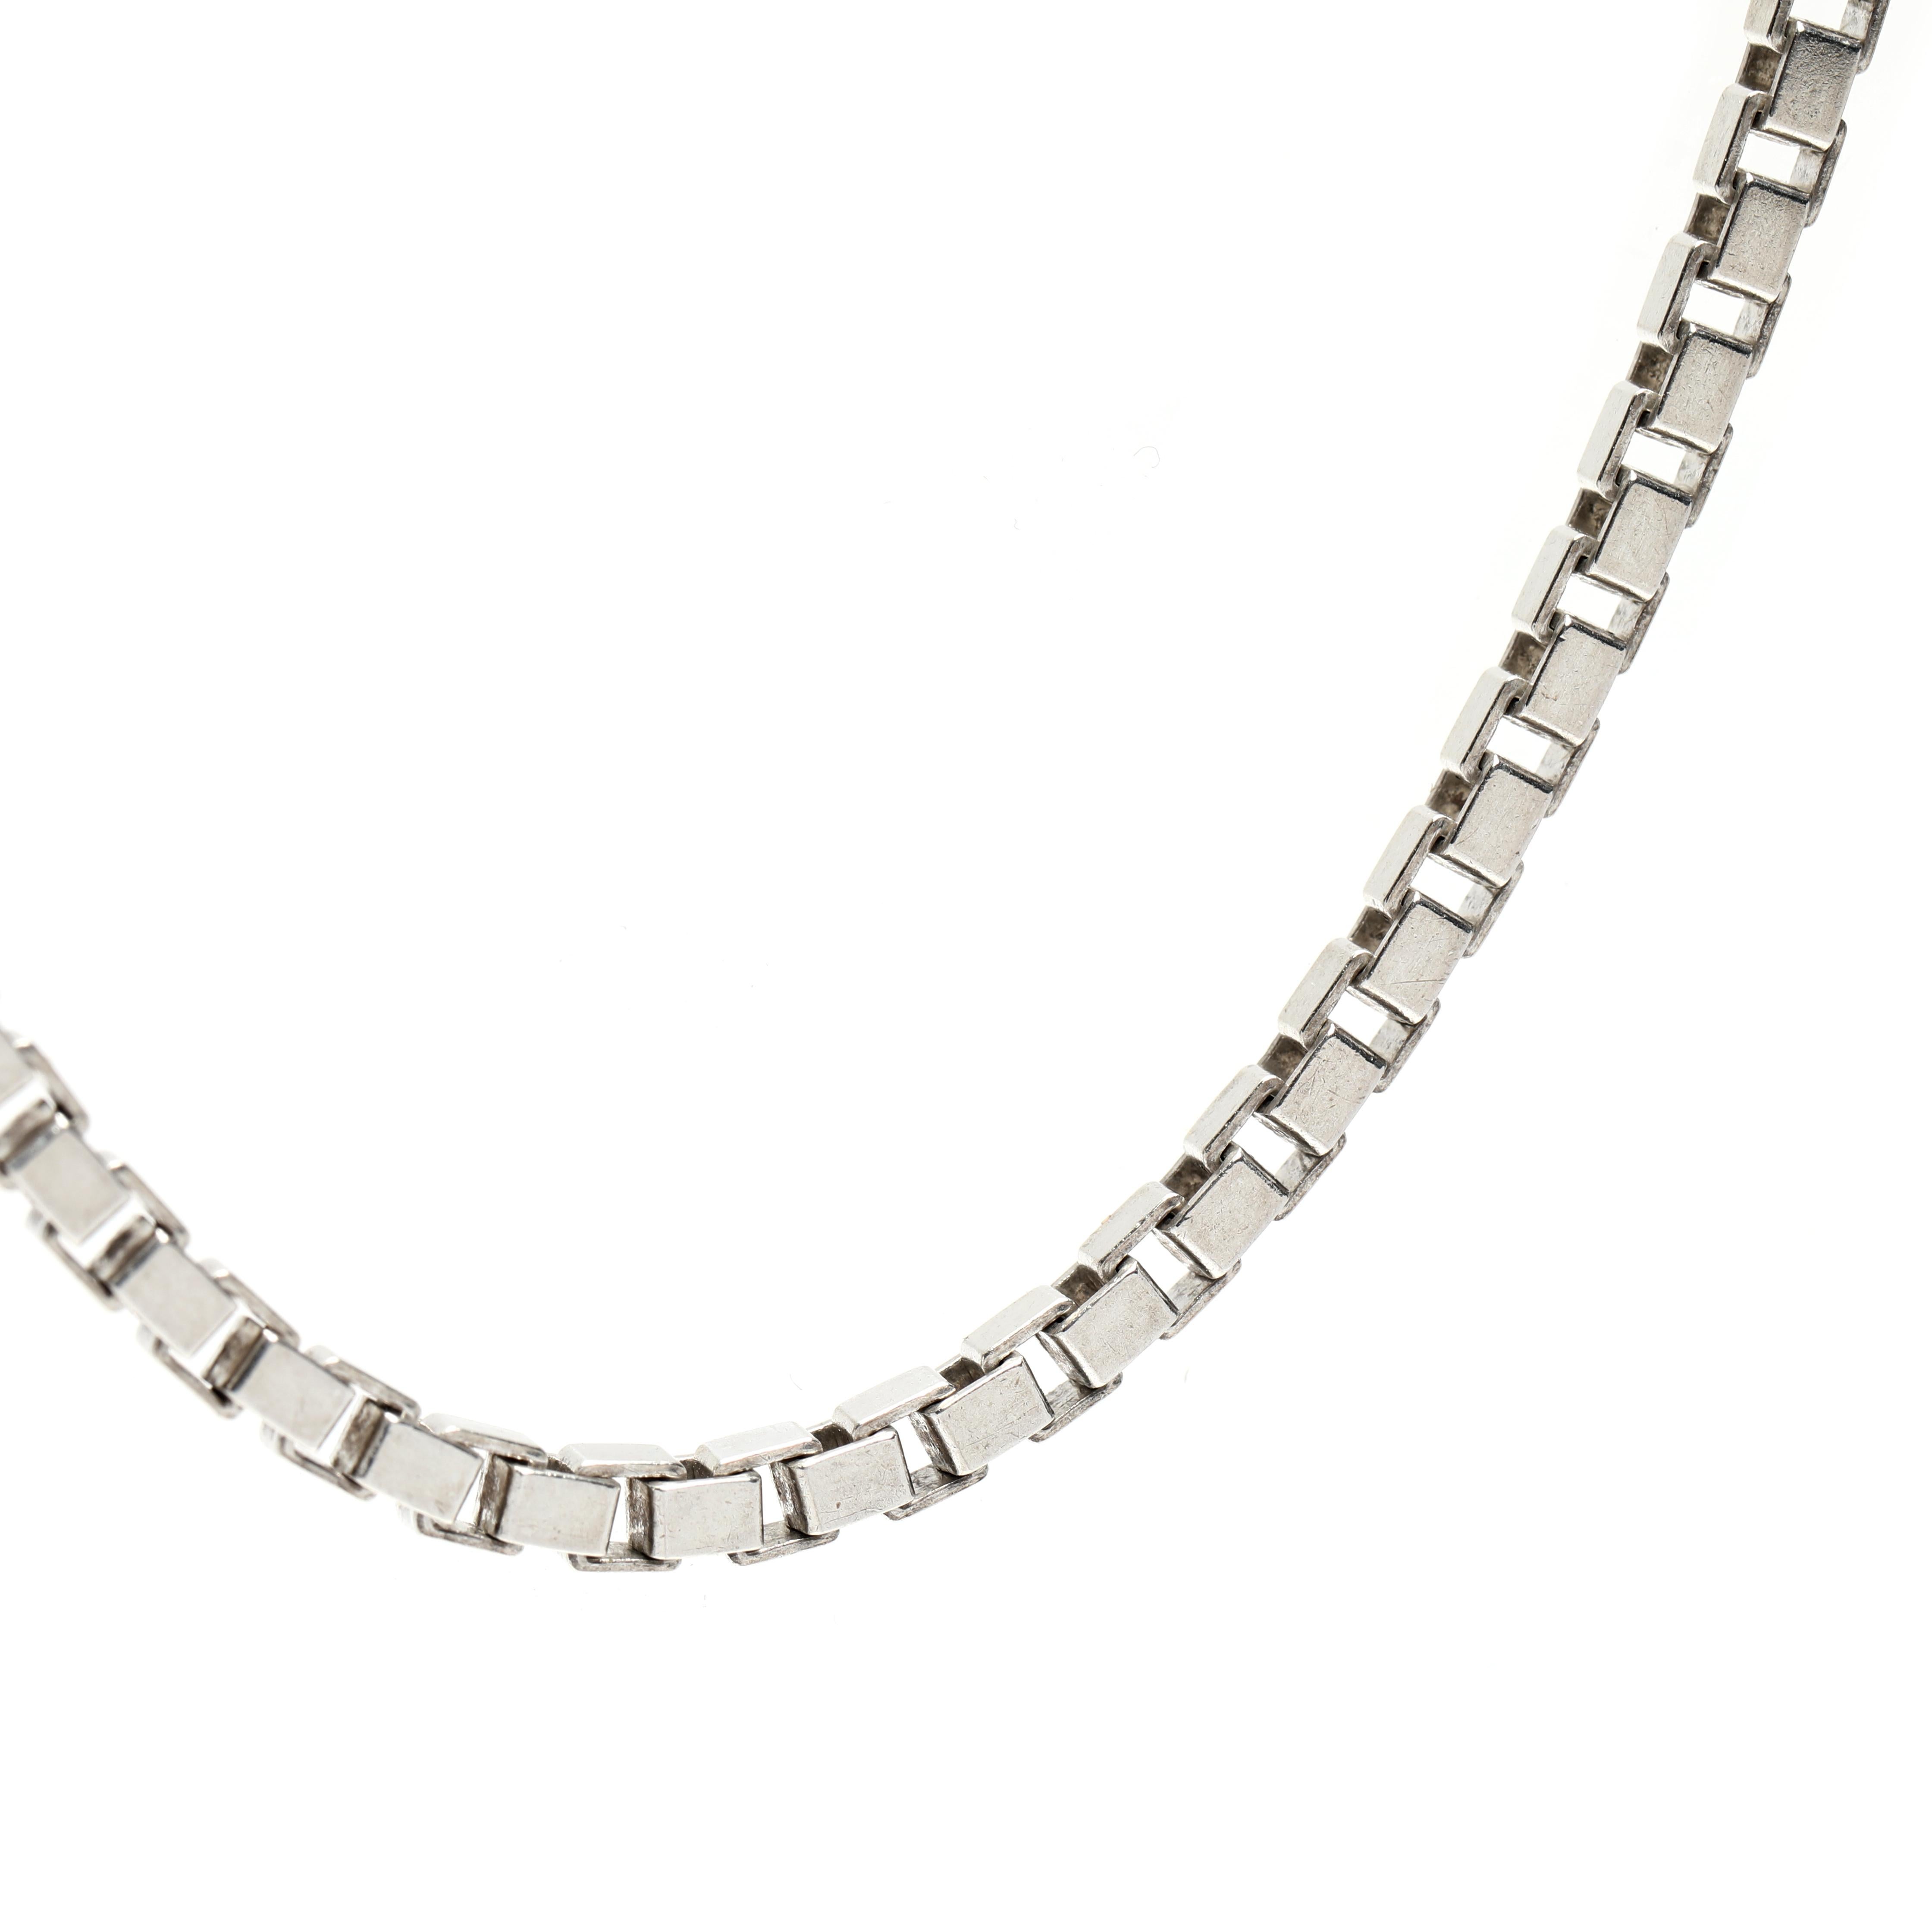 This gorgeous vintage Italian box chain necklace is crafted in sterling silver. It features a thick box chain design with a 16-inch length and a bold statement. This stunning necklace is sure to impress and will make a great addition to any jewelry